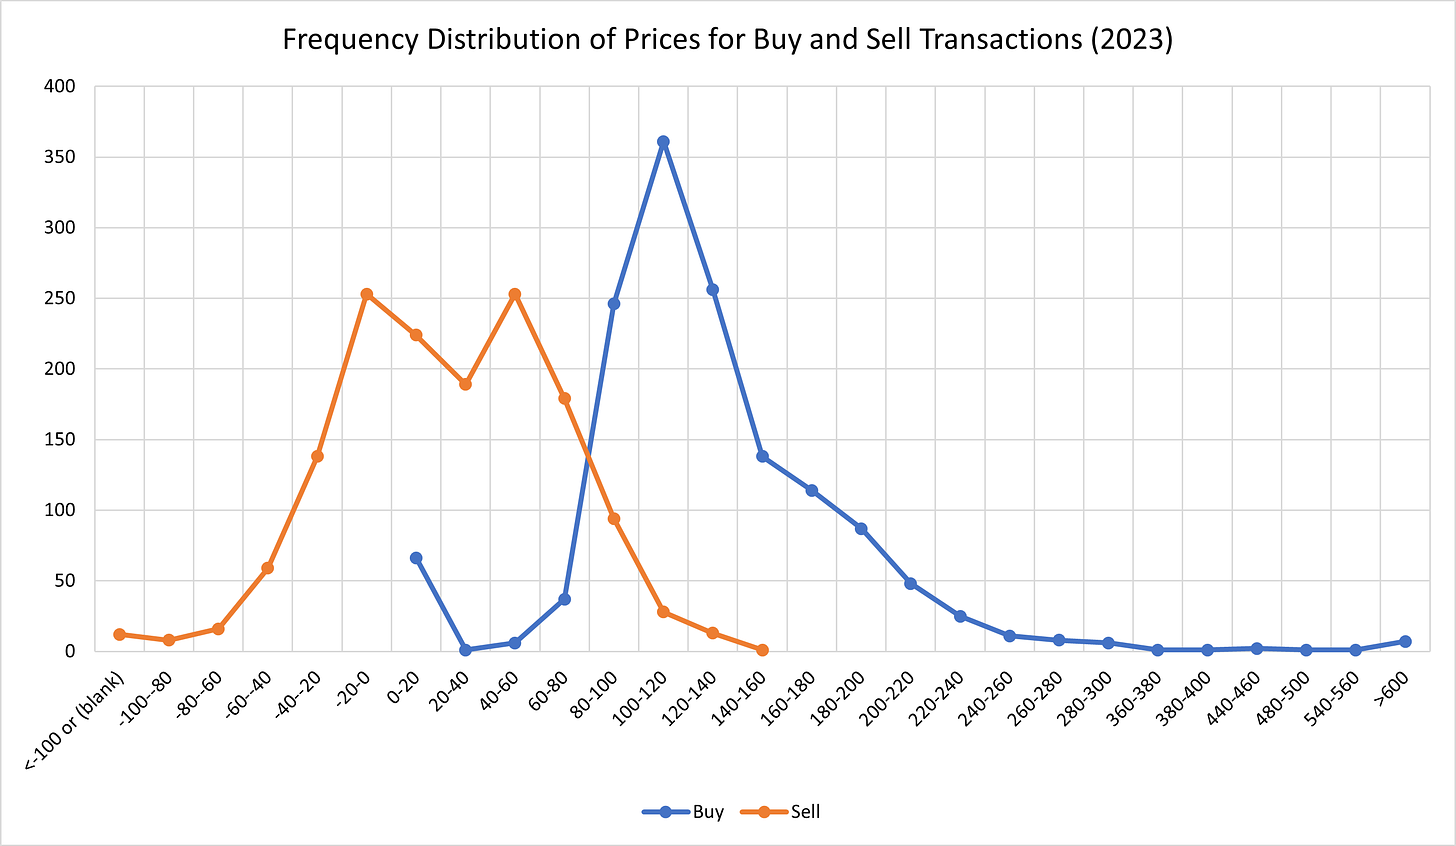 Figure 6b - Frequency Distribution of Prices for Interconnector Buy and Sell Transactions 2023